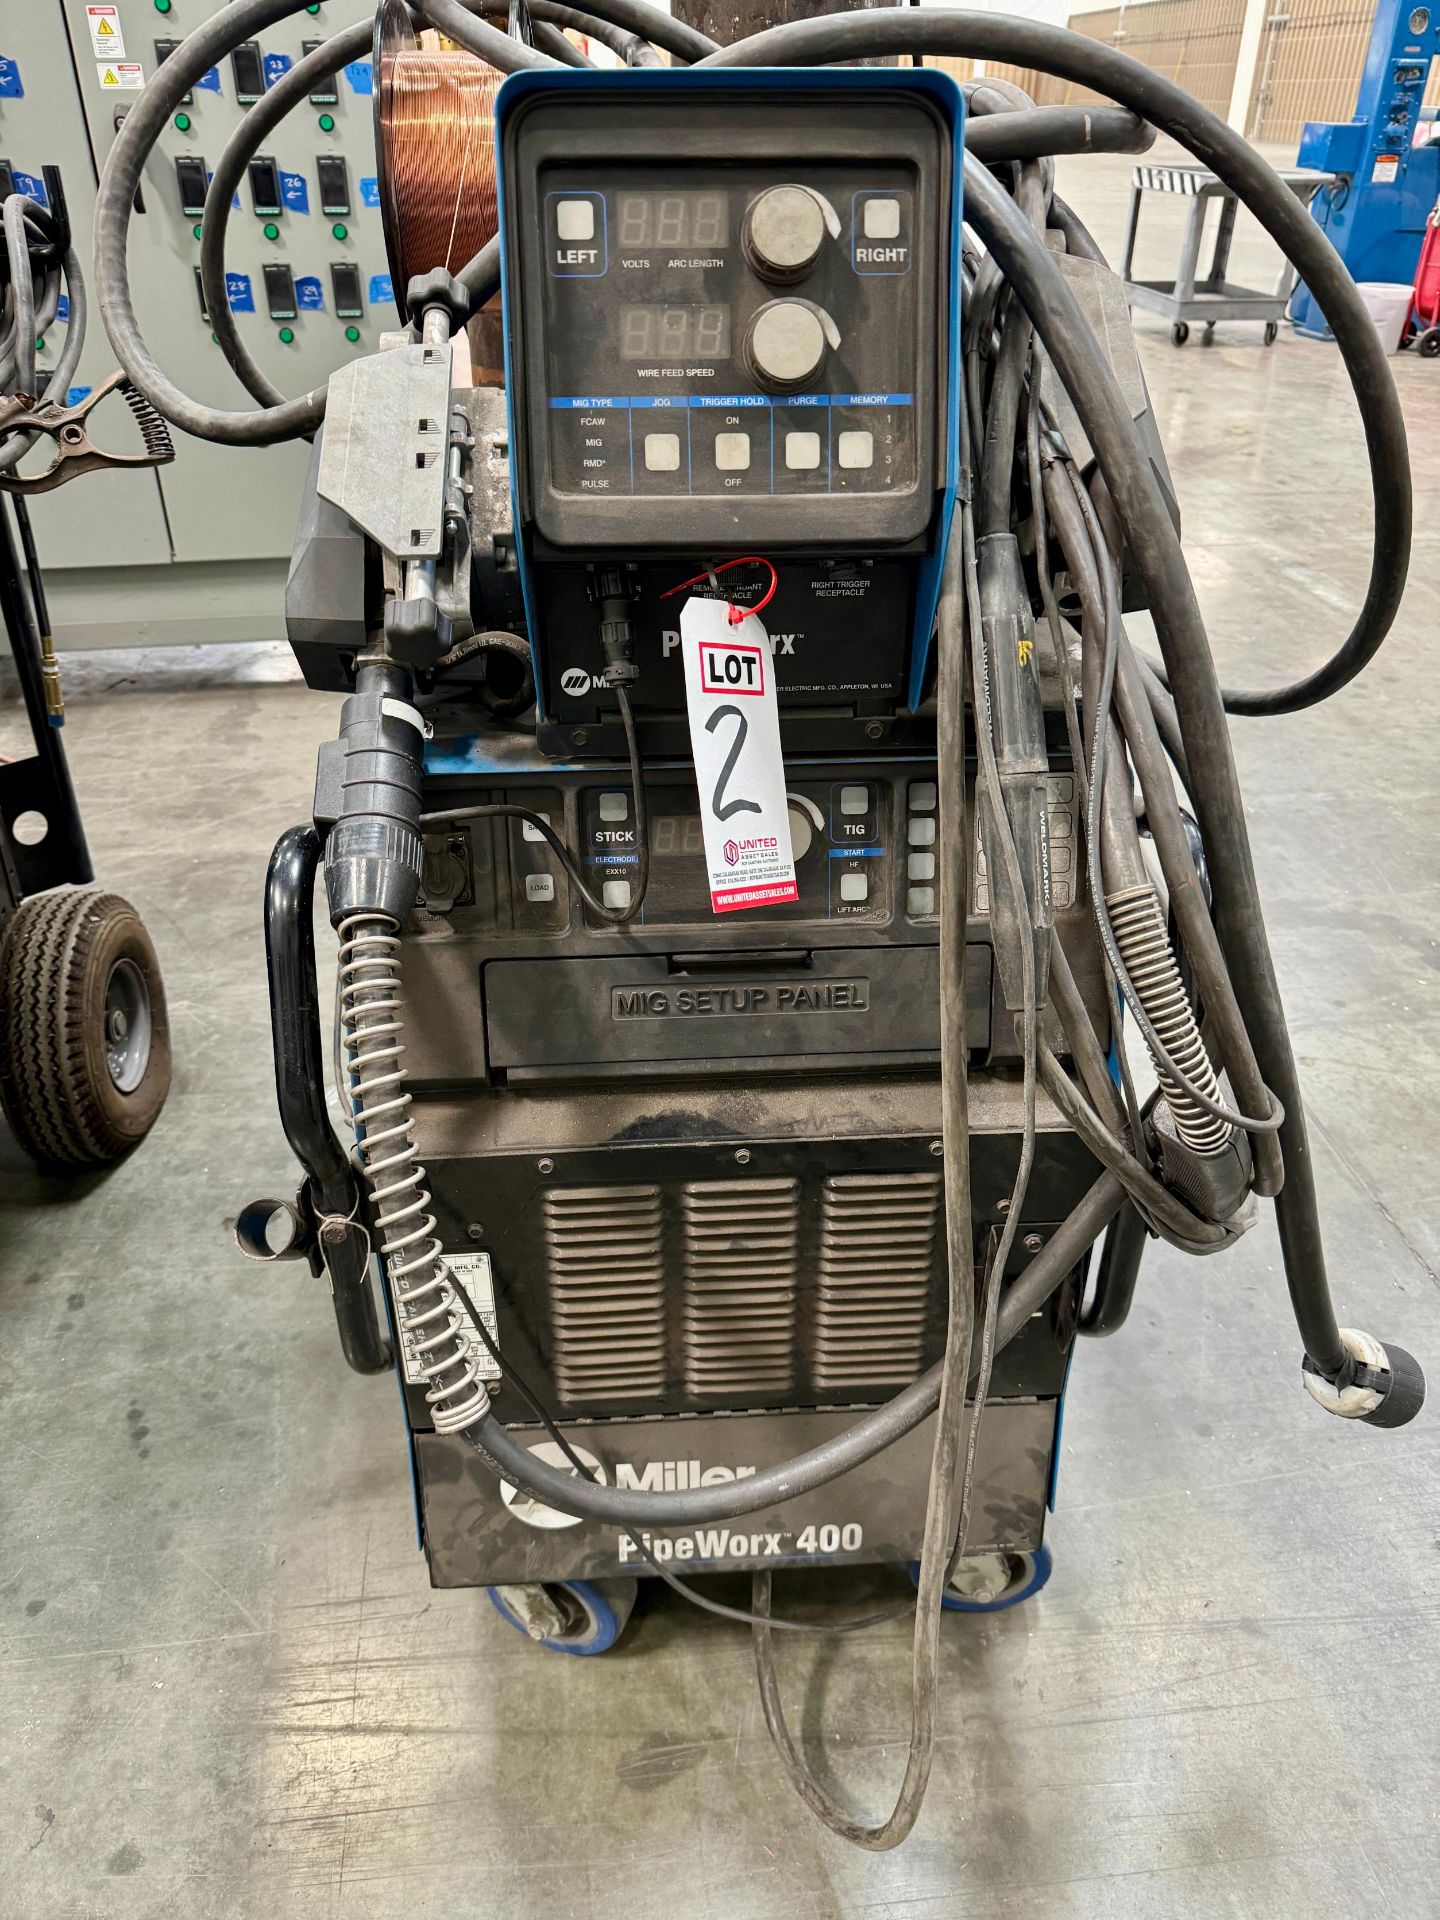 MILLER PIPEWORX 400 WELDER, S/N MF040217C, W/ WIRE FEEDER, OXY TANKS ARE NOT INCLUDED - Image 2 of 8